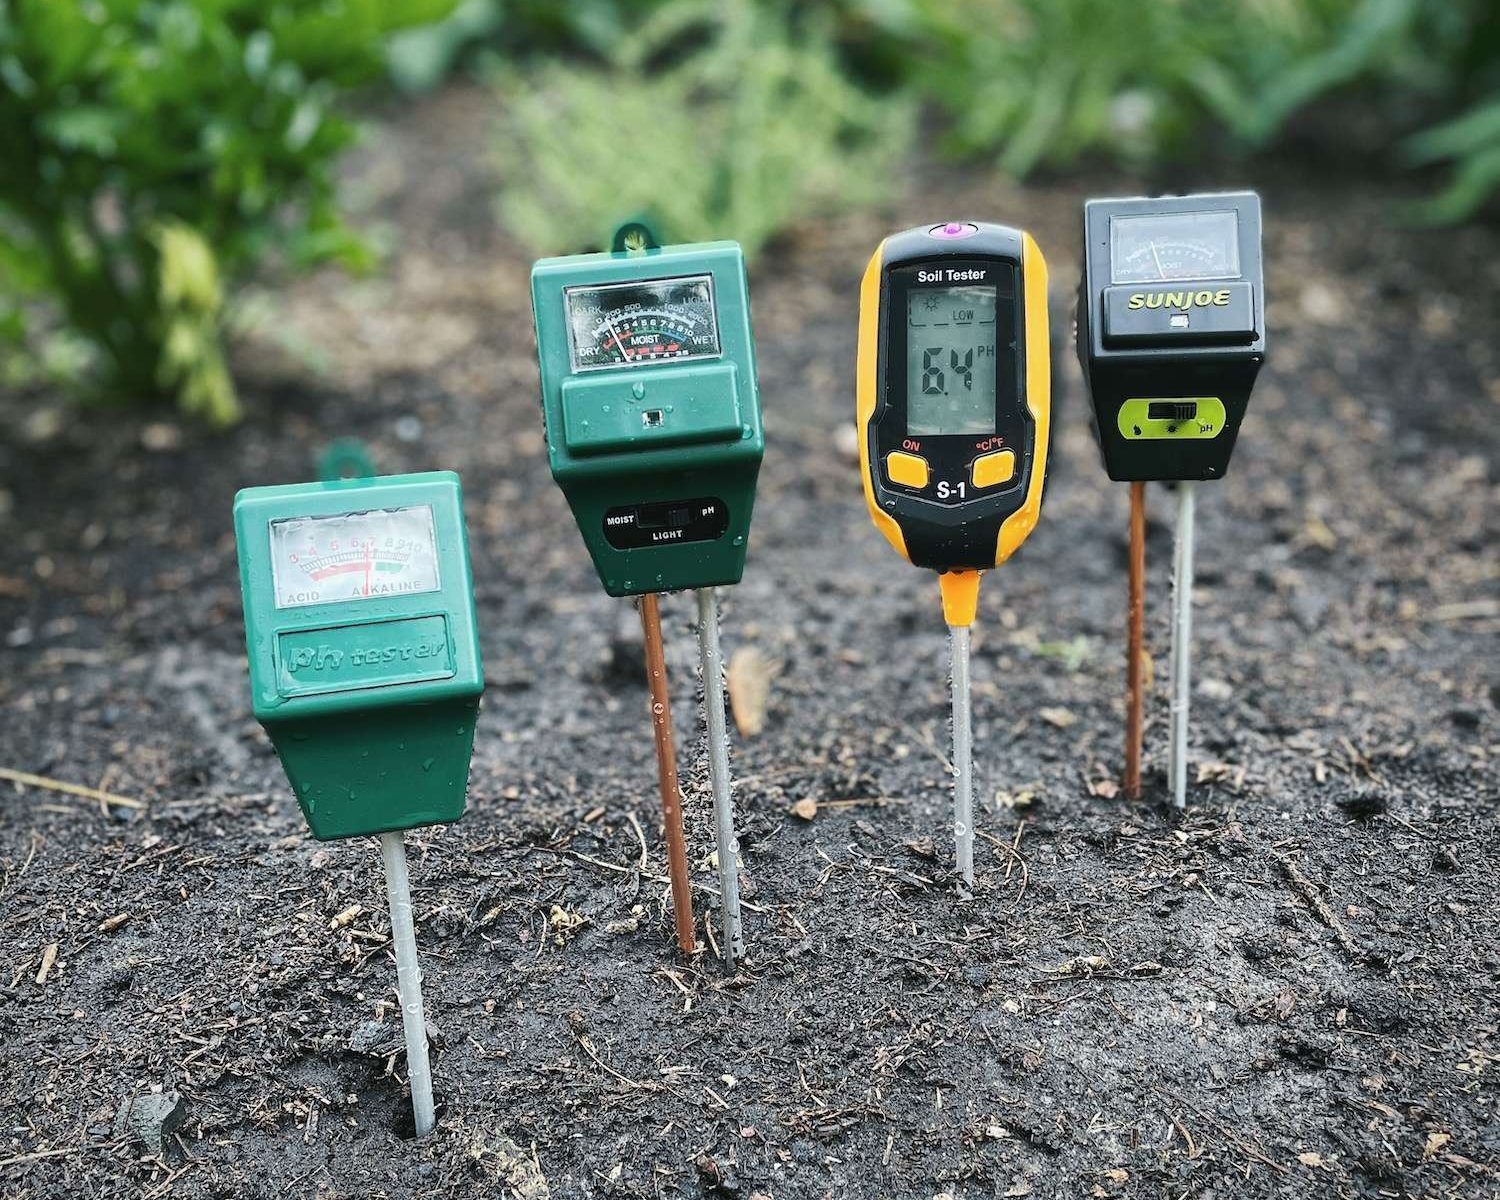 4 soil pH testers inserted into the soil of a raised bed